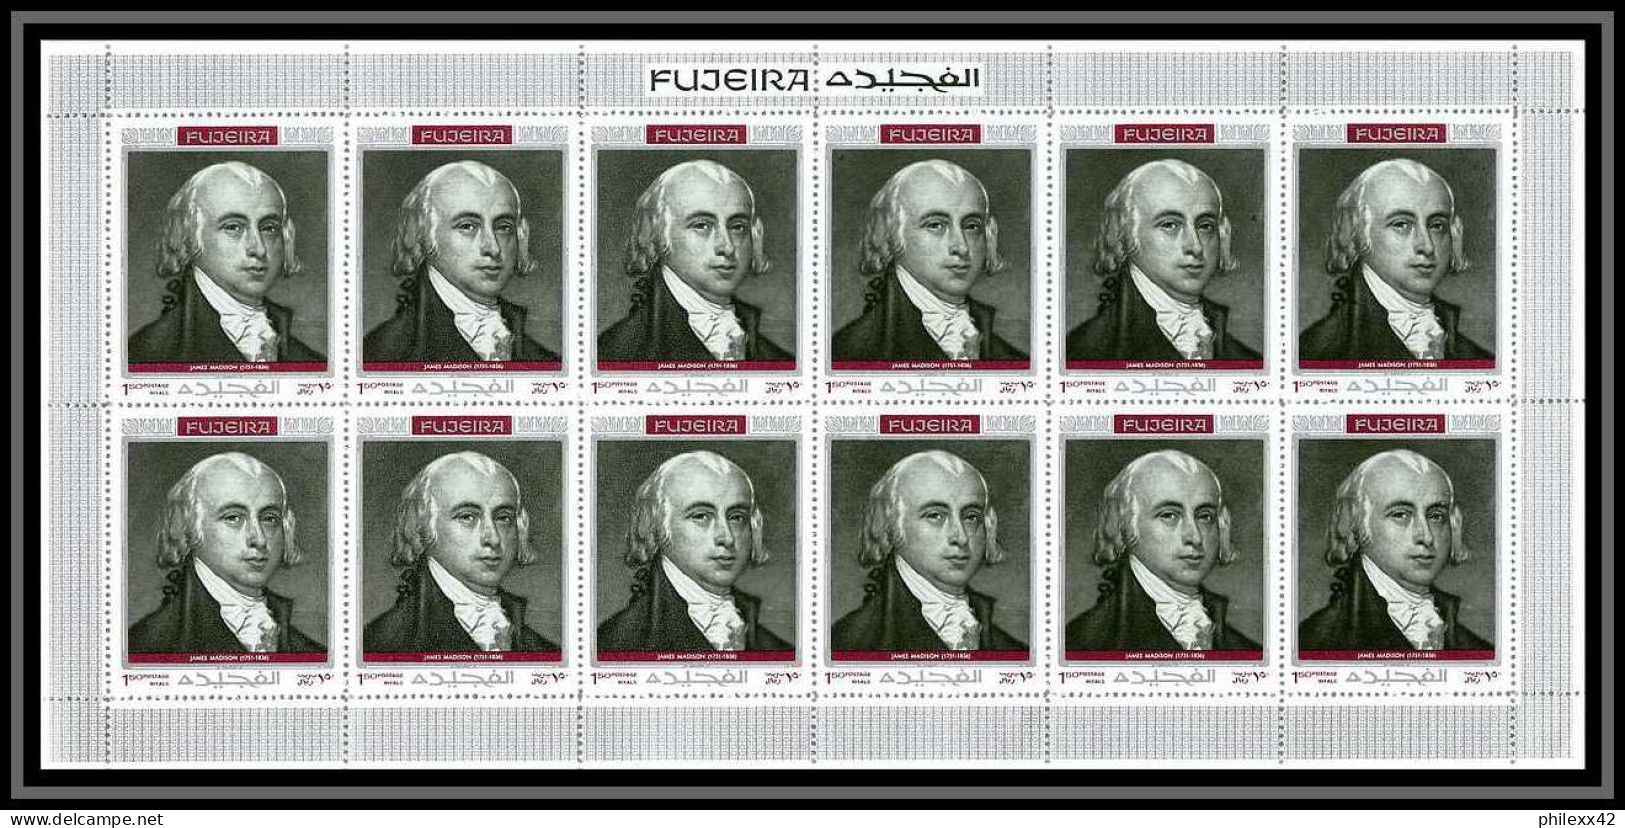 364 Fujeira MNH ** Mi N° 485 / 494 A personalities from american history space kennedy armstrong lincoln feuilles sheets